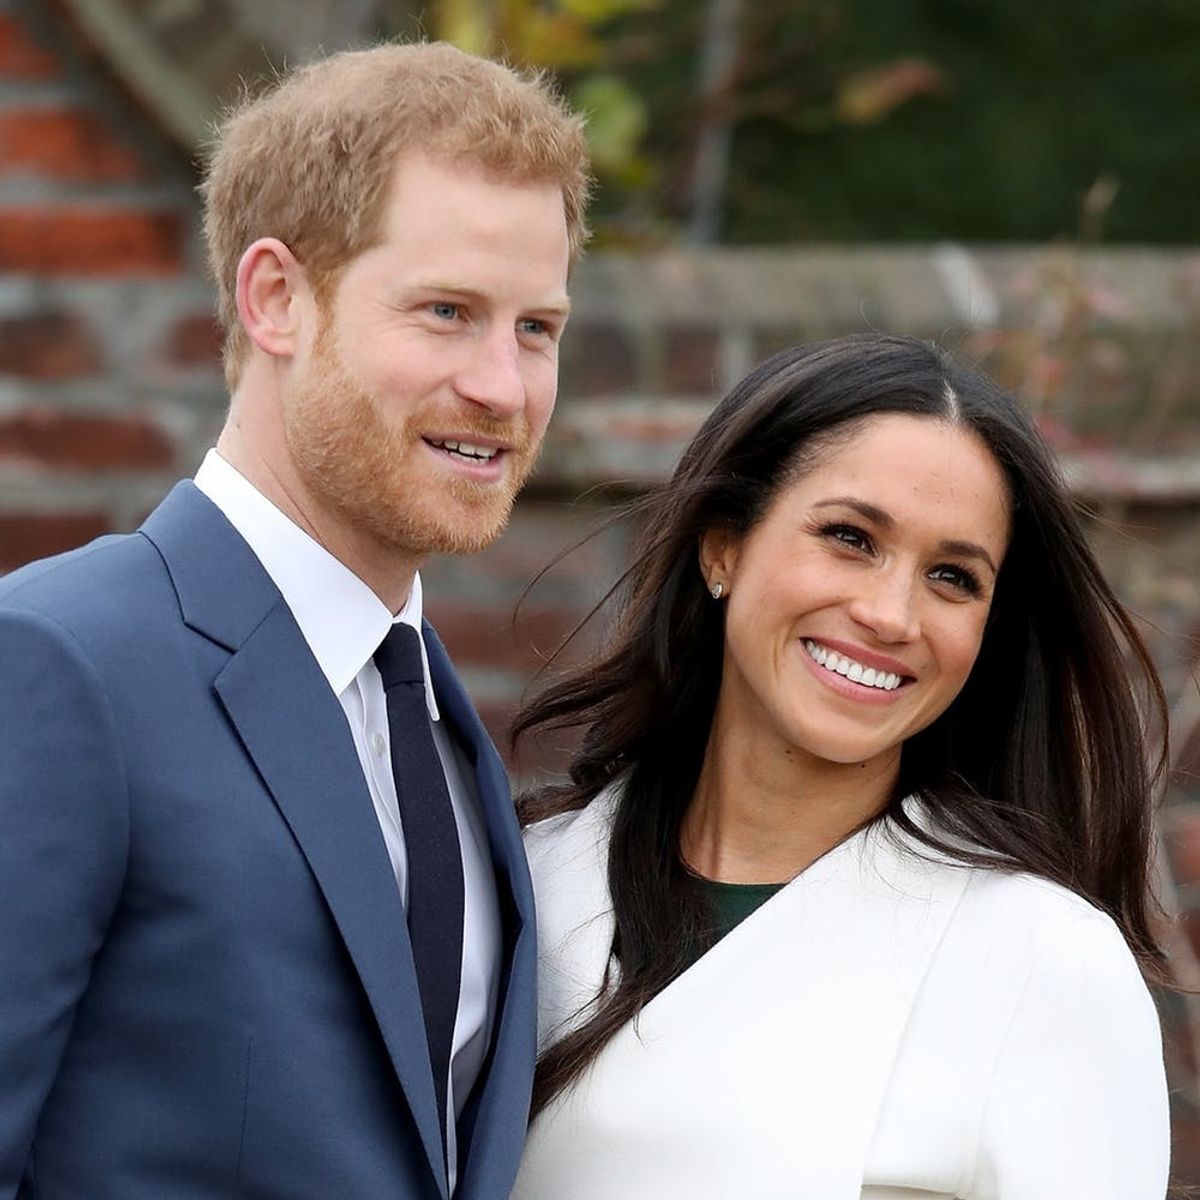 Prince Harry Shut Down This Theory About His Honeymoon With Meghan Markle